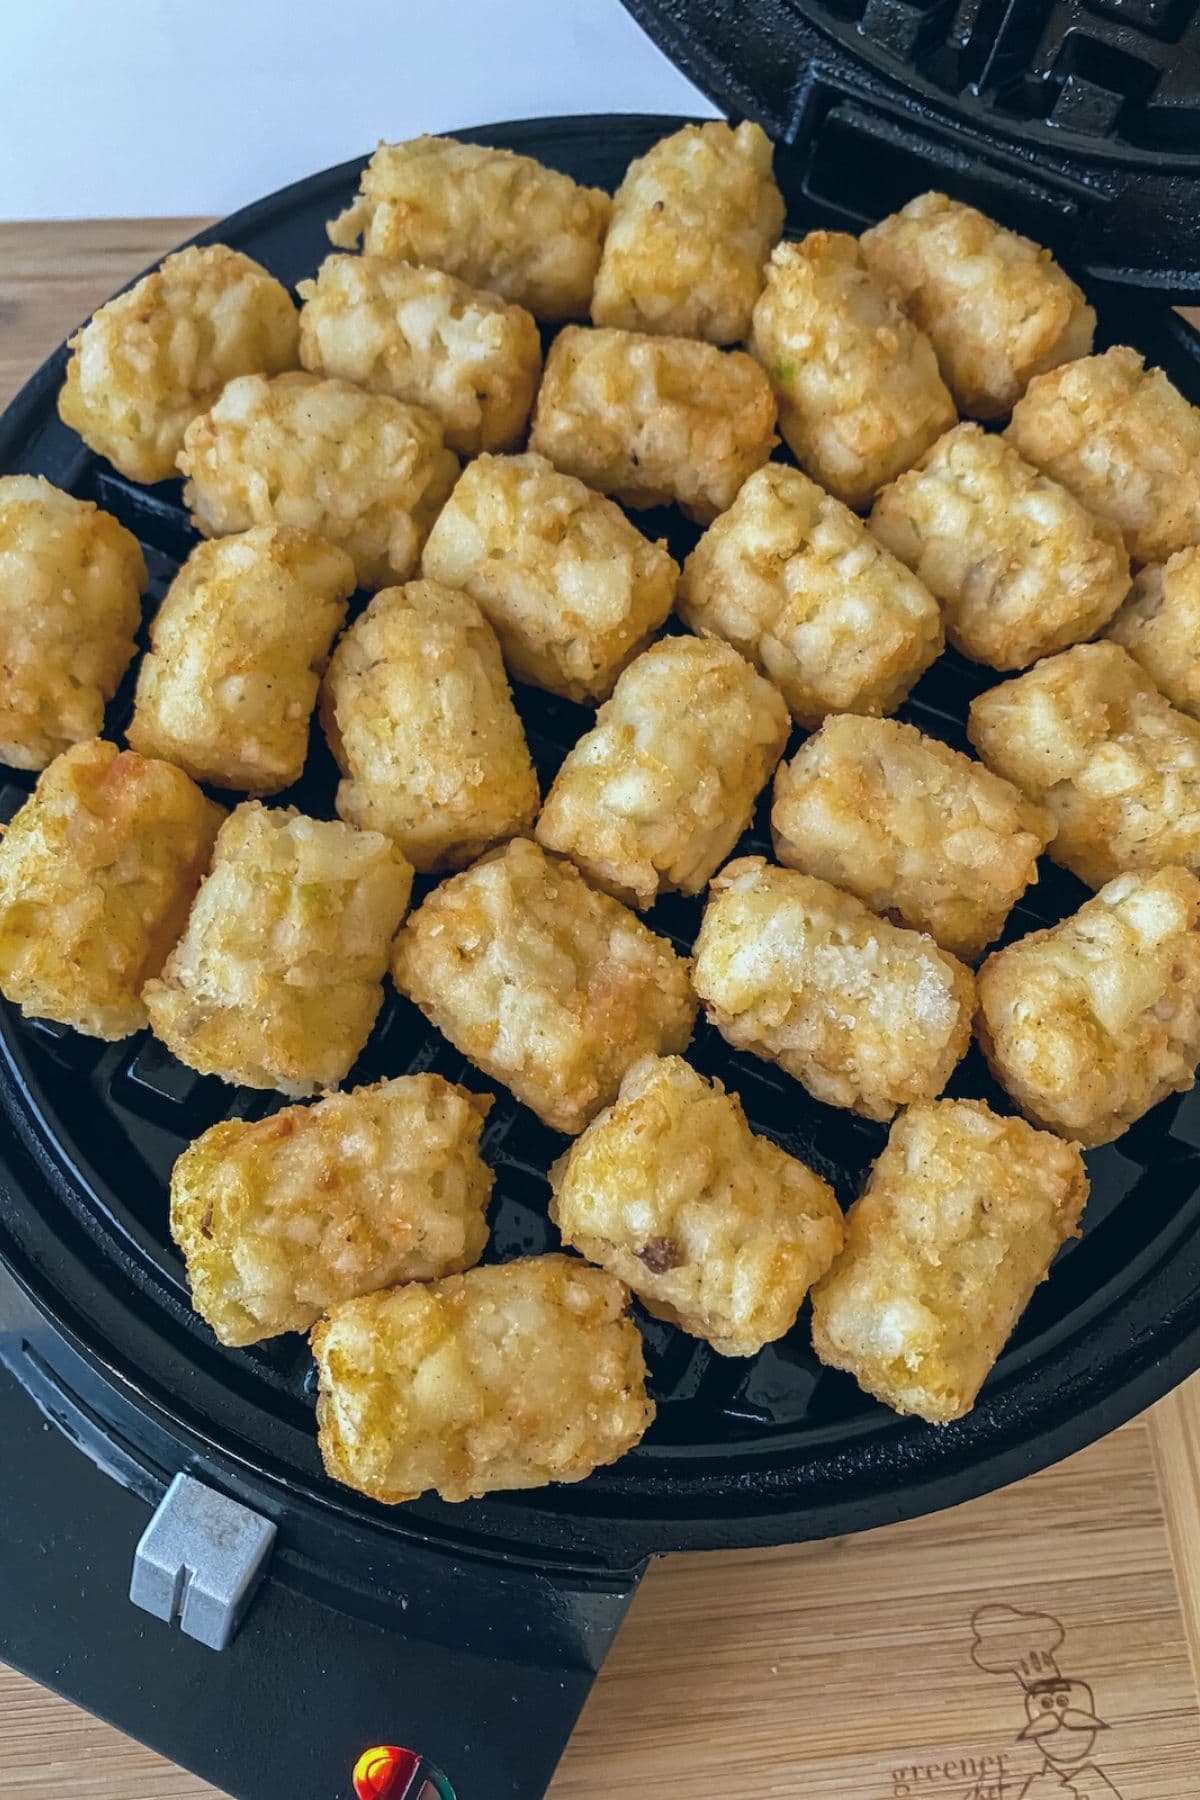 Tater tots spread onto waffle maker